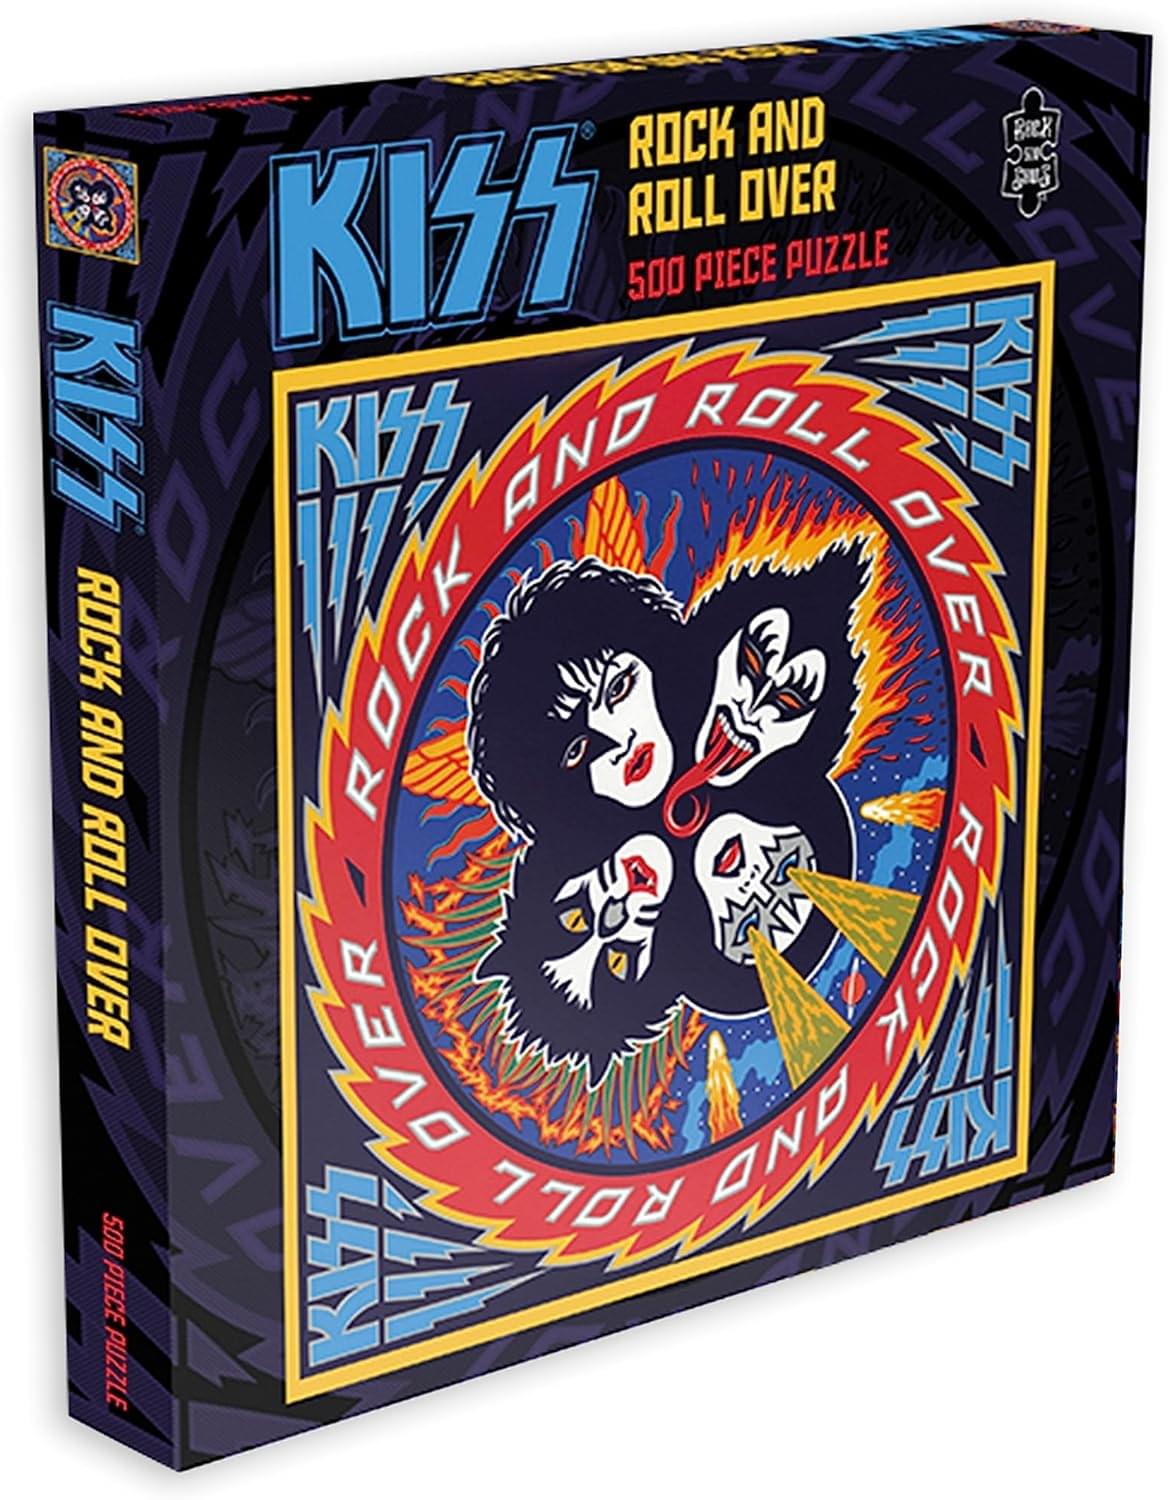 KISS Rock And Roll Over 500 Piece Jigsaw Puzzle